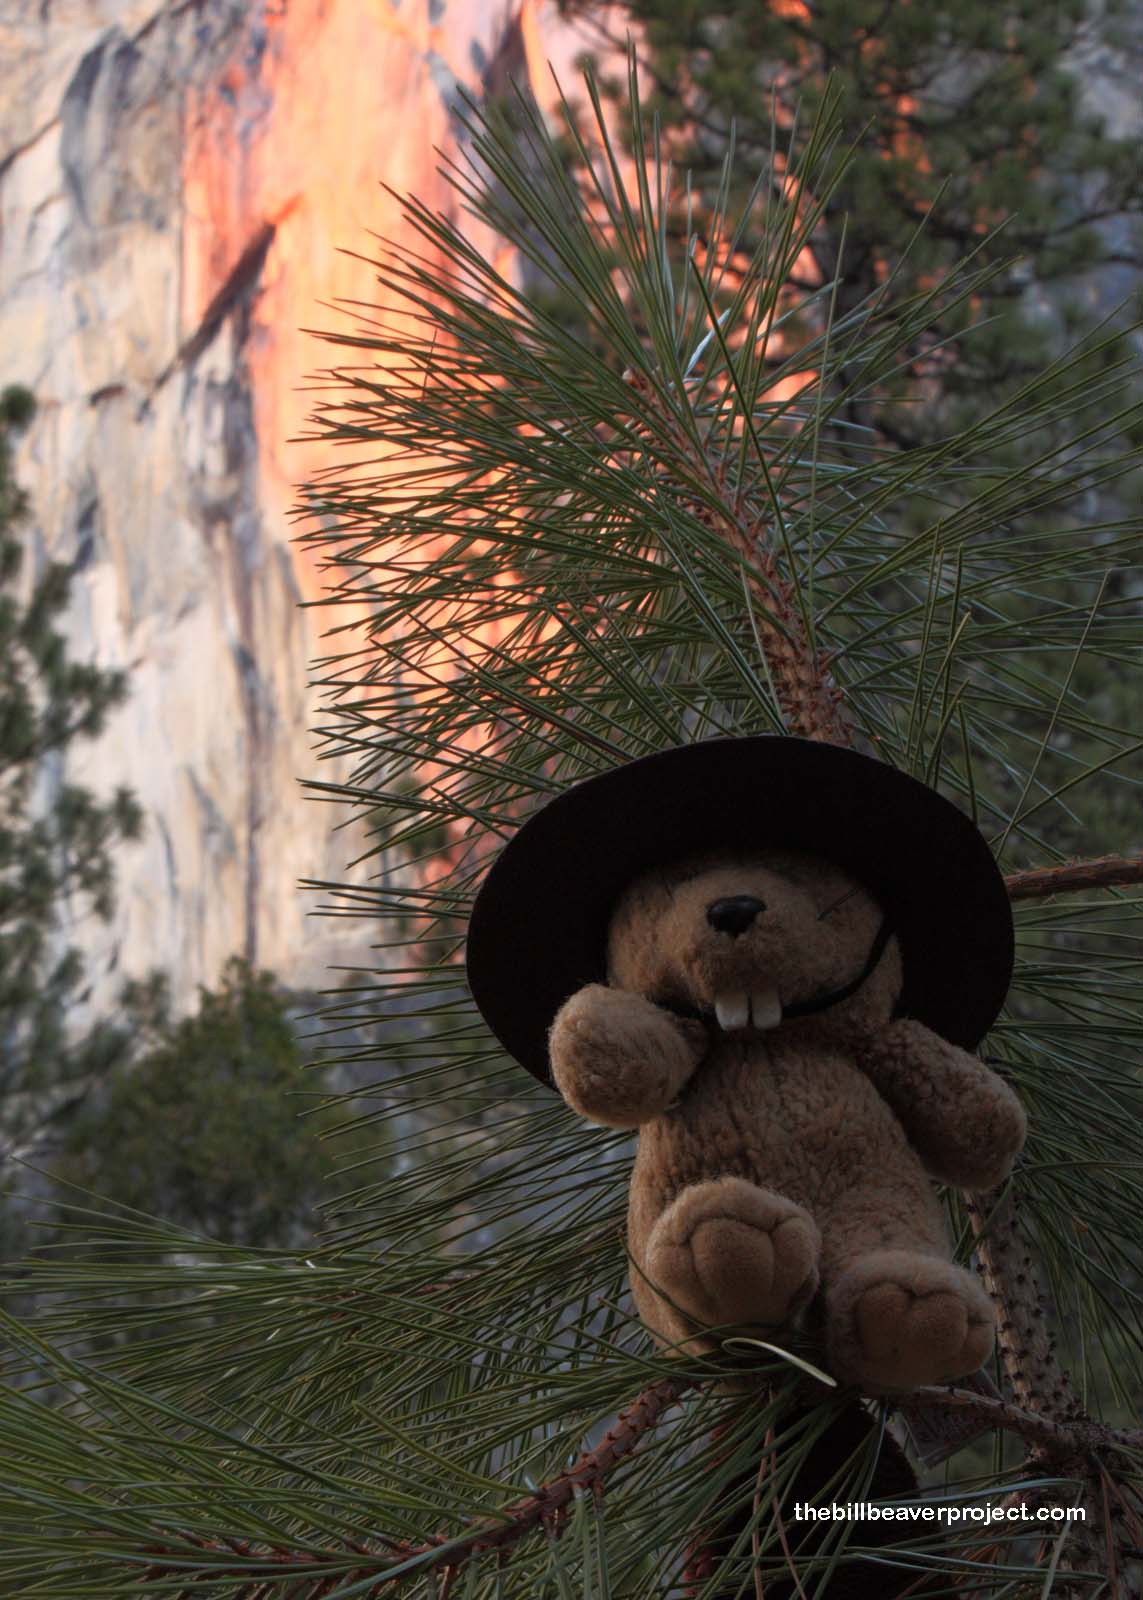 Yosemite's Firefall event happens every February, if you're lucky!